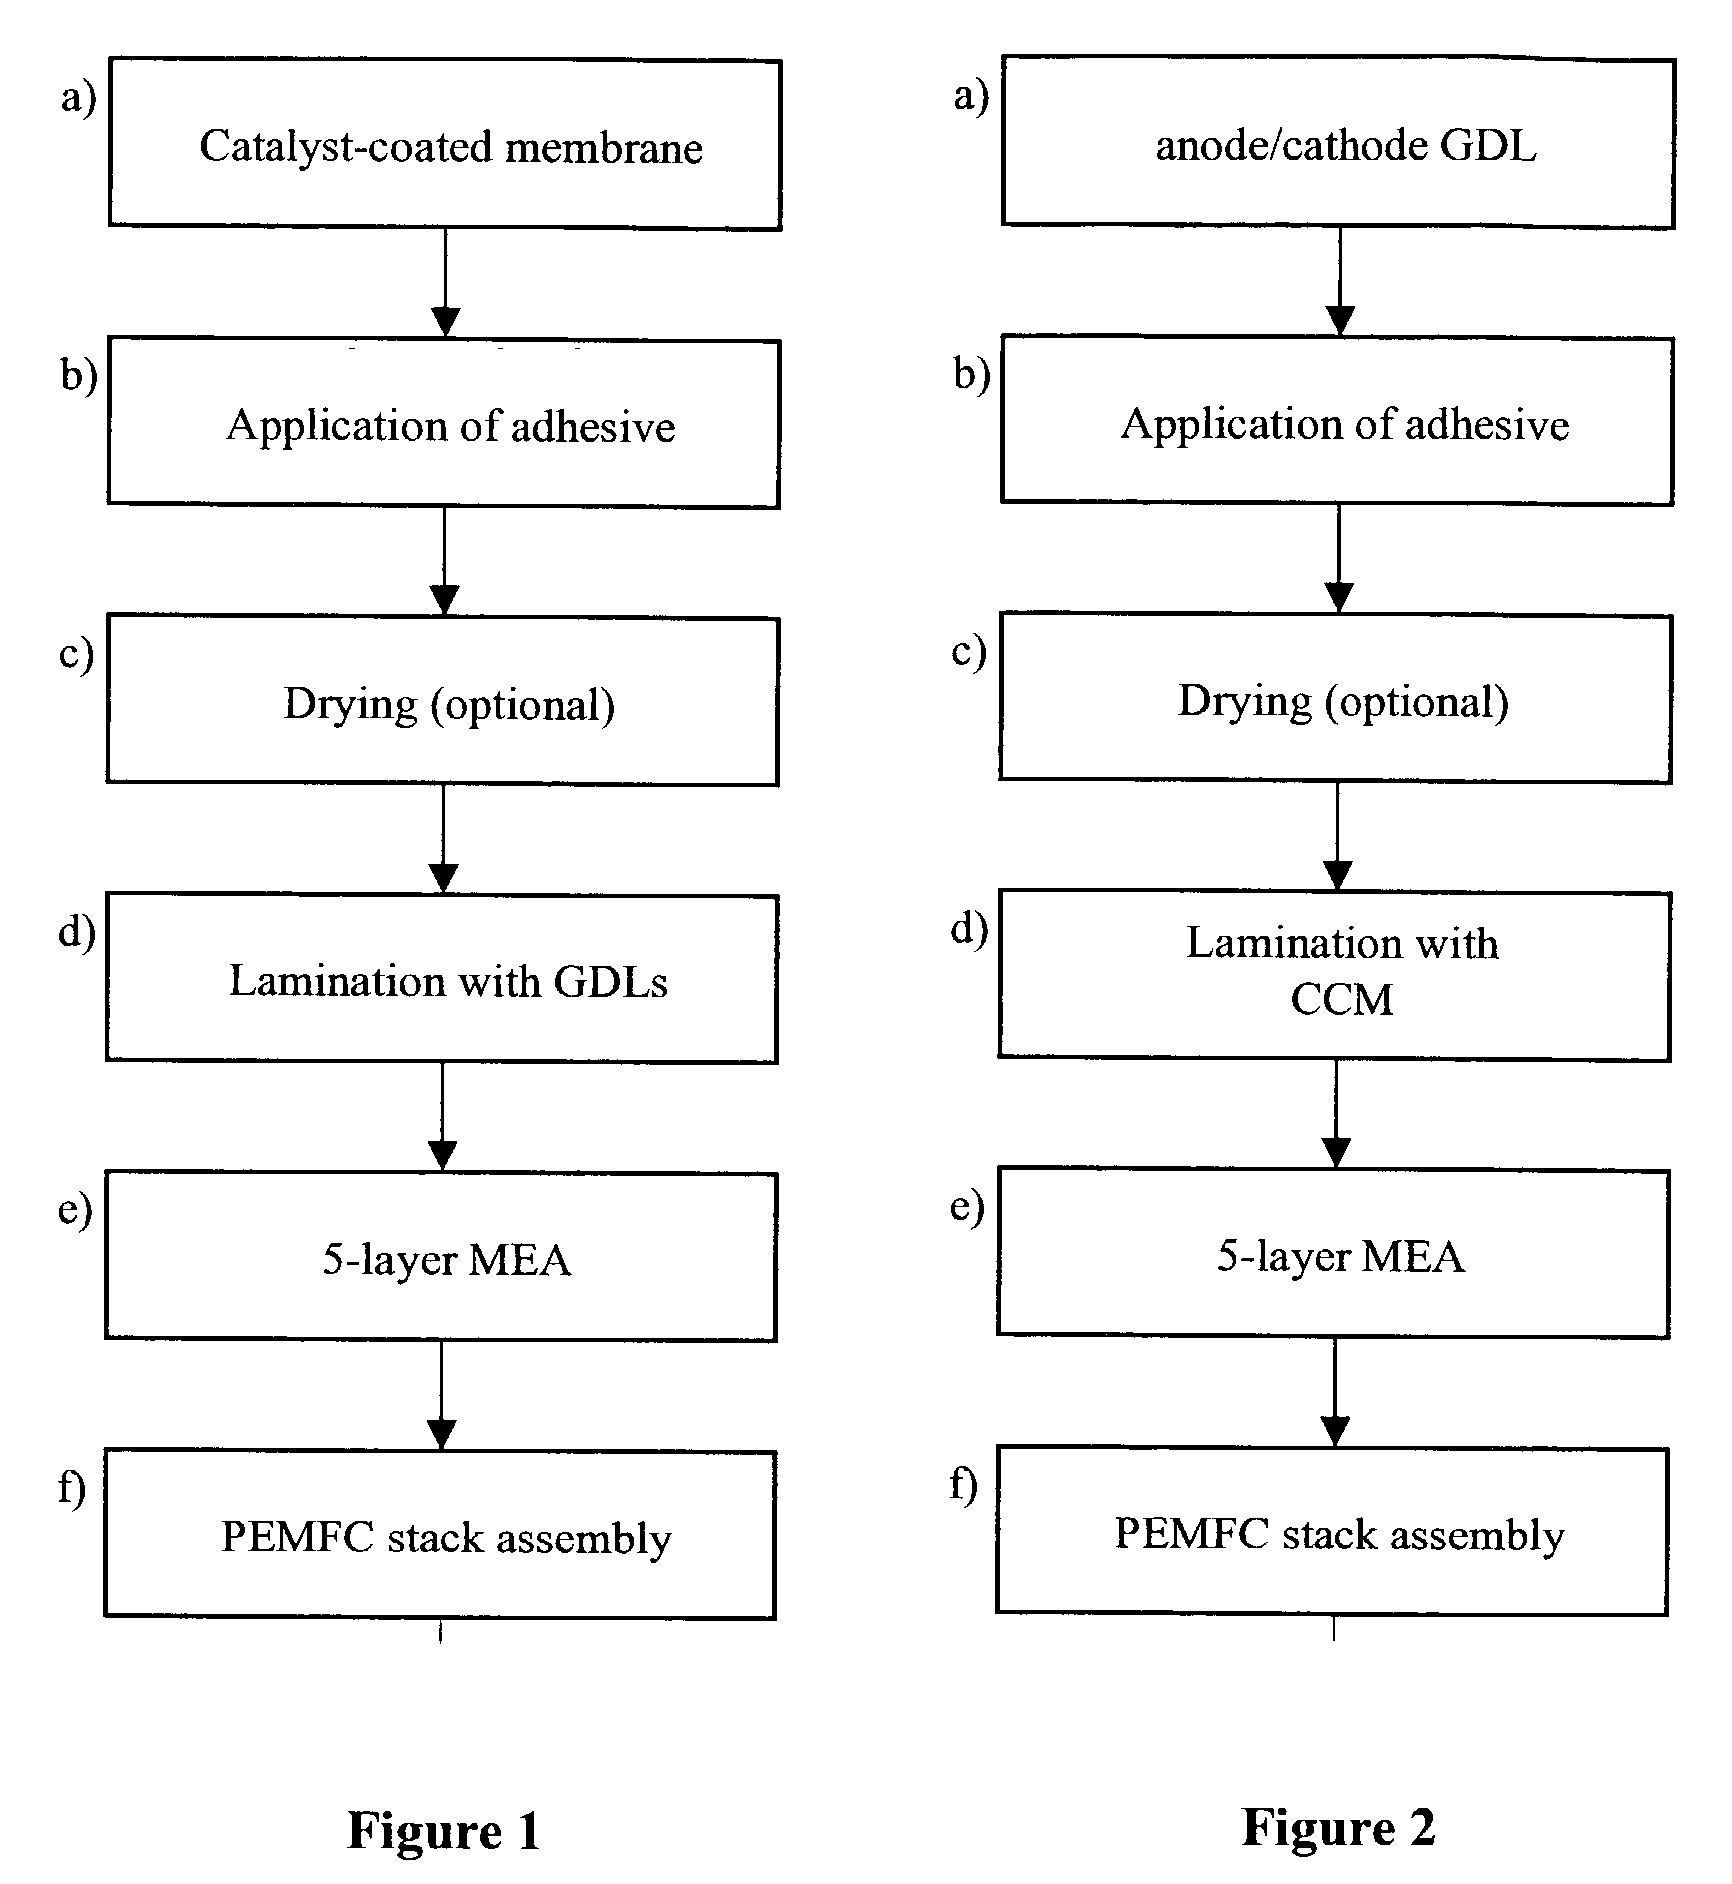 Process for the manufacture of membrane-electrode-assemblies using catalyst-coated membranes